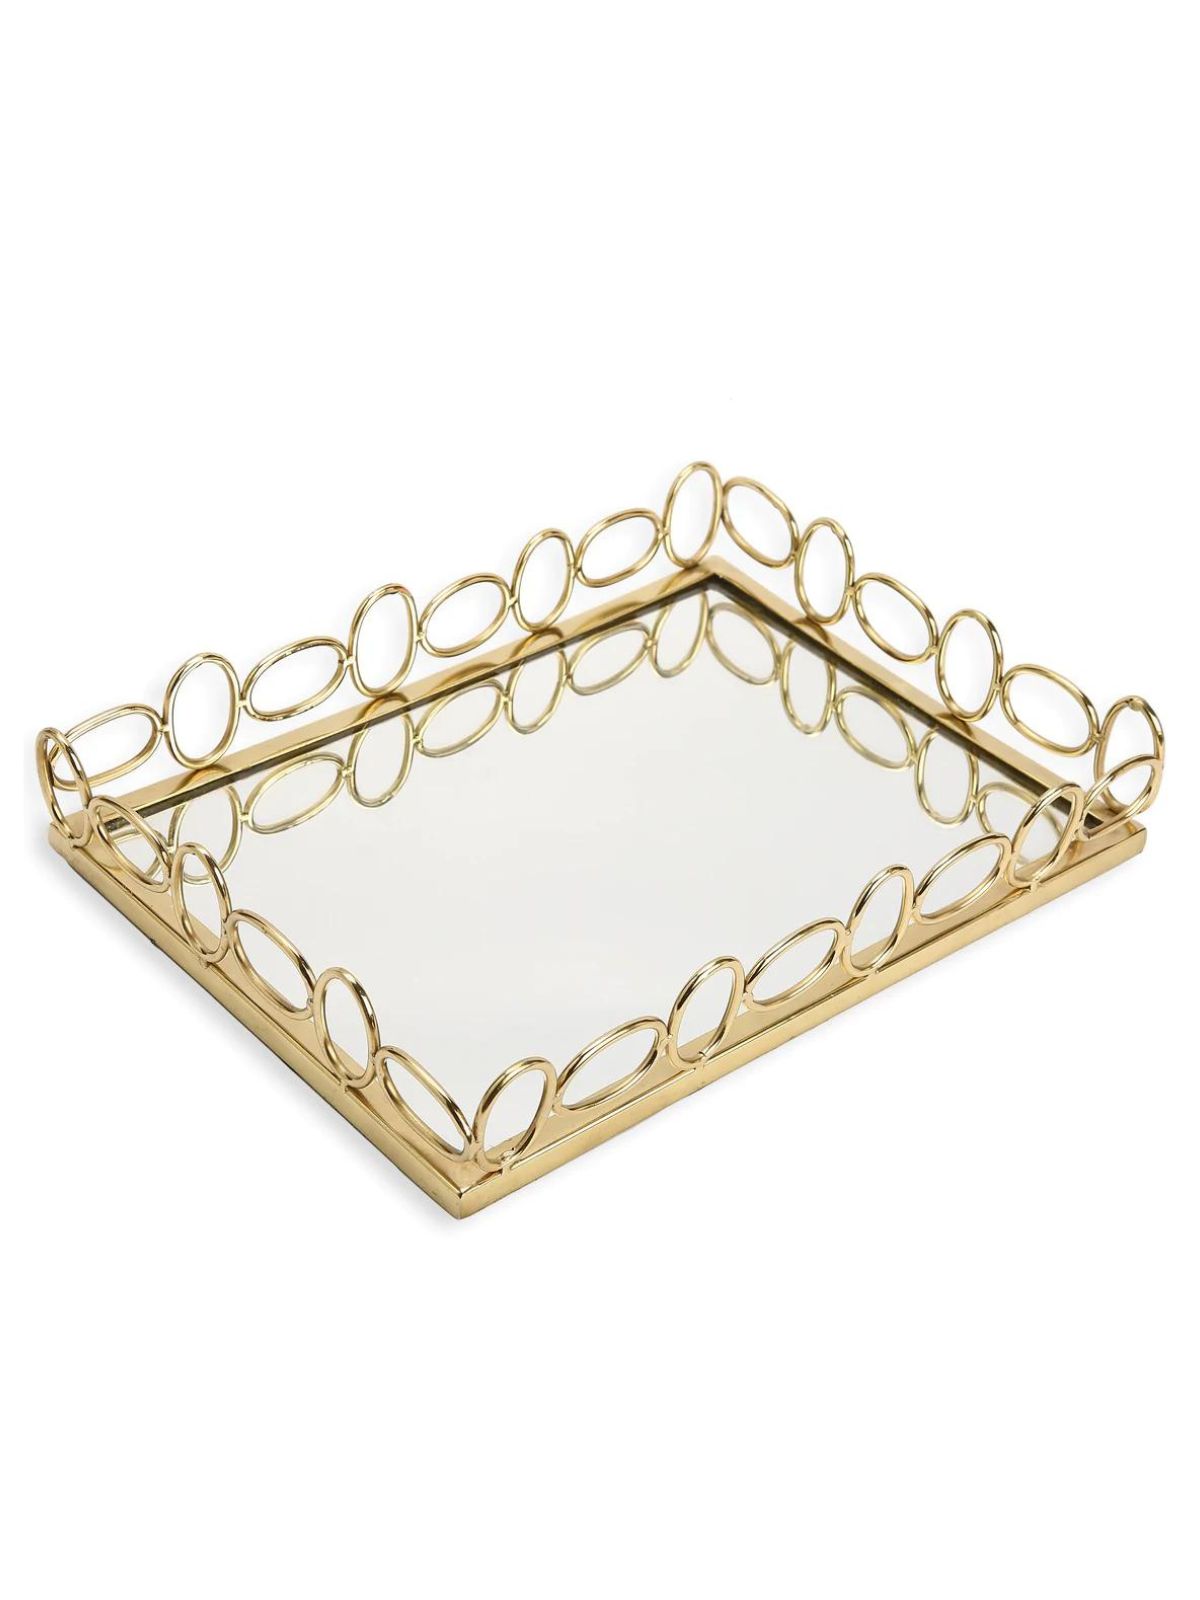 Oblong Decorative Mirror Glass Tray with Stainless Steel Gold Oval Design Sold by KYA Home Decor.